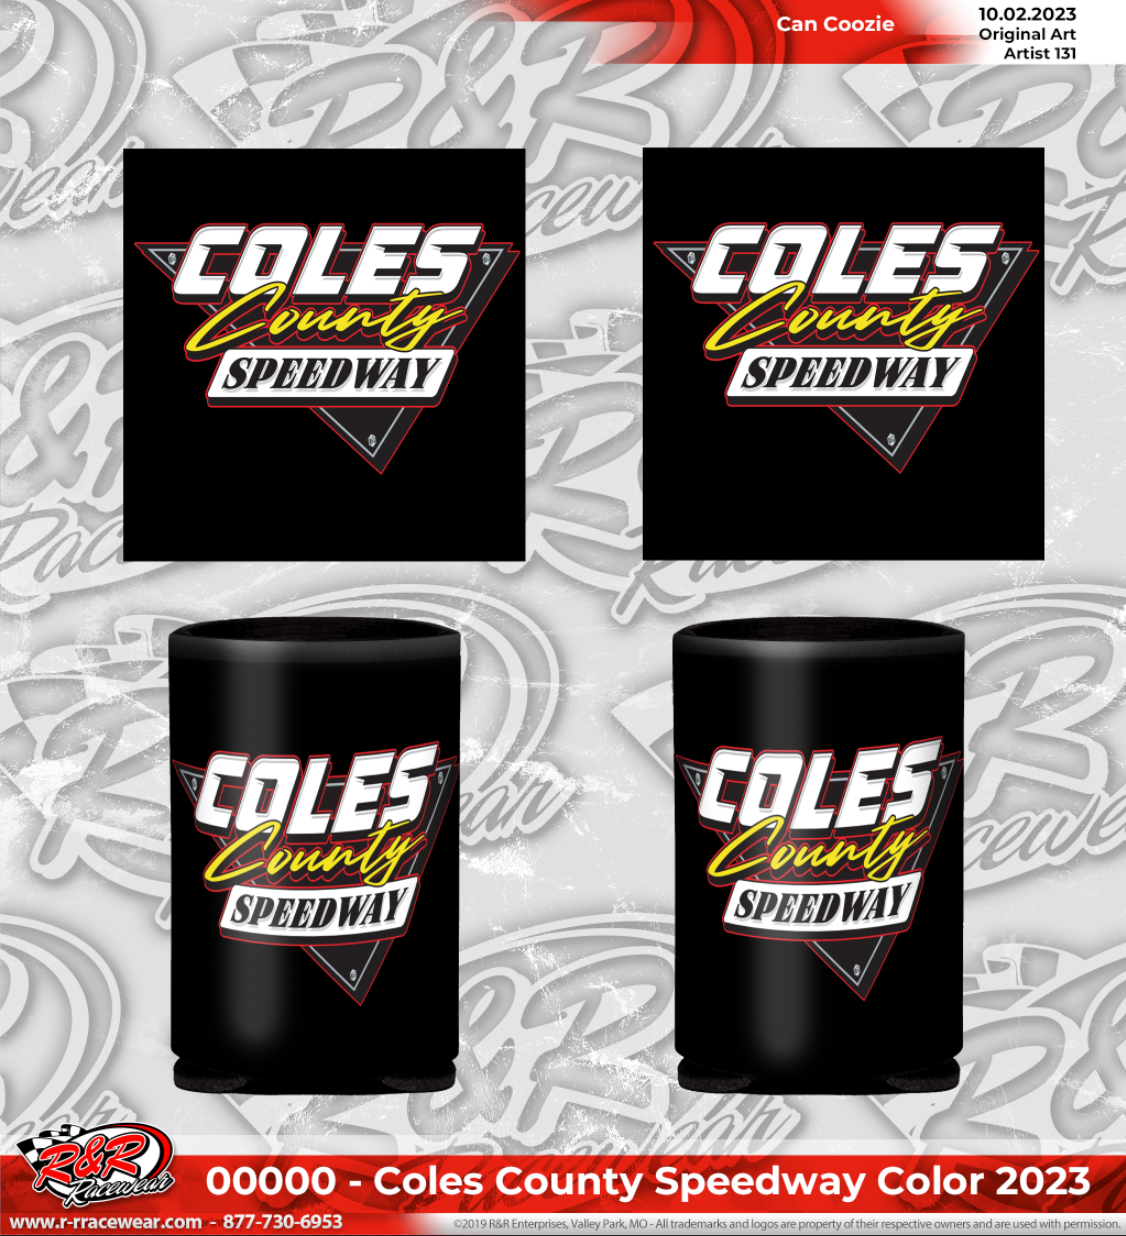 Coles County 12oz can koozie